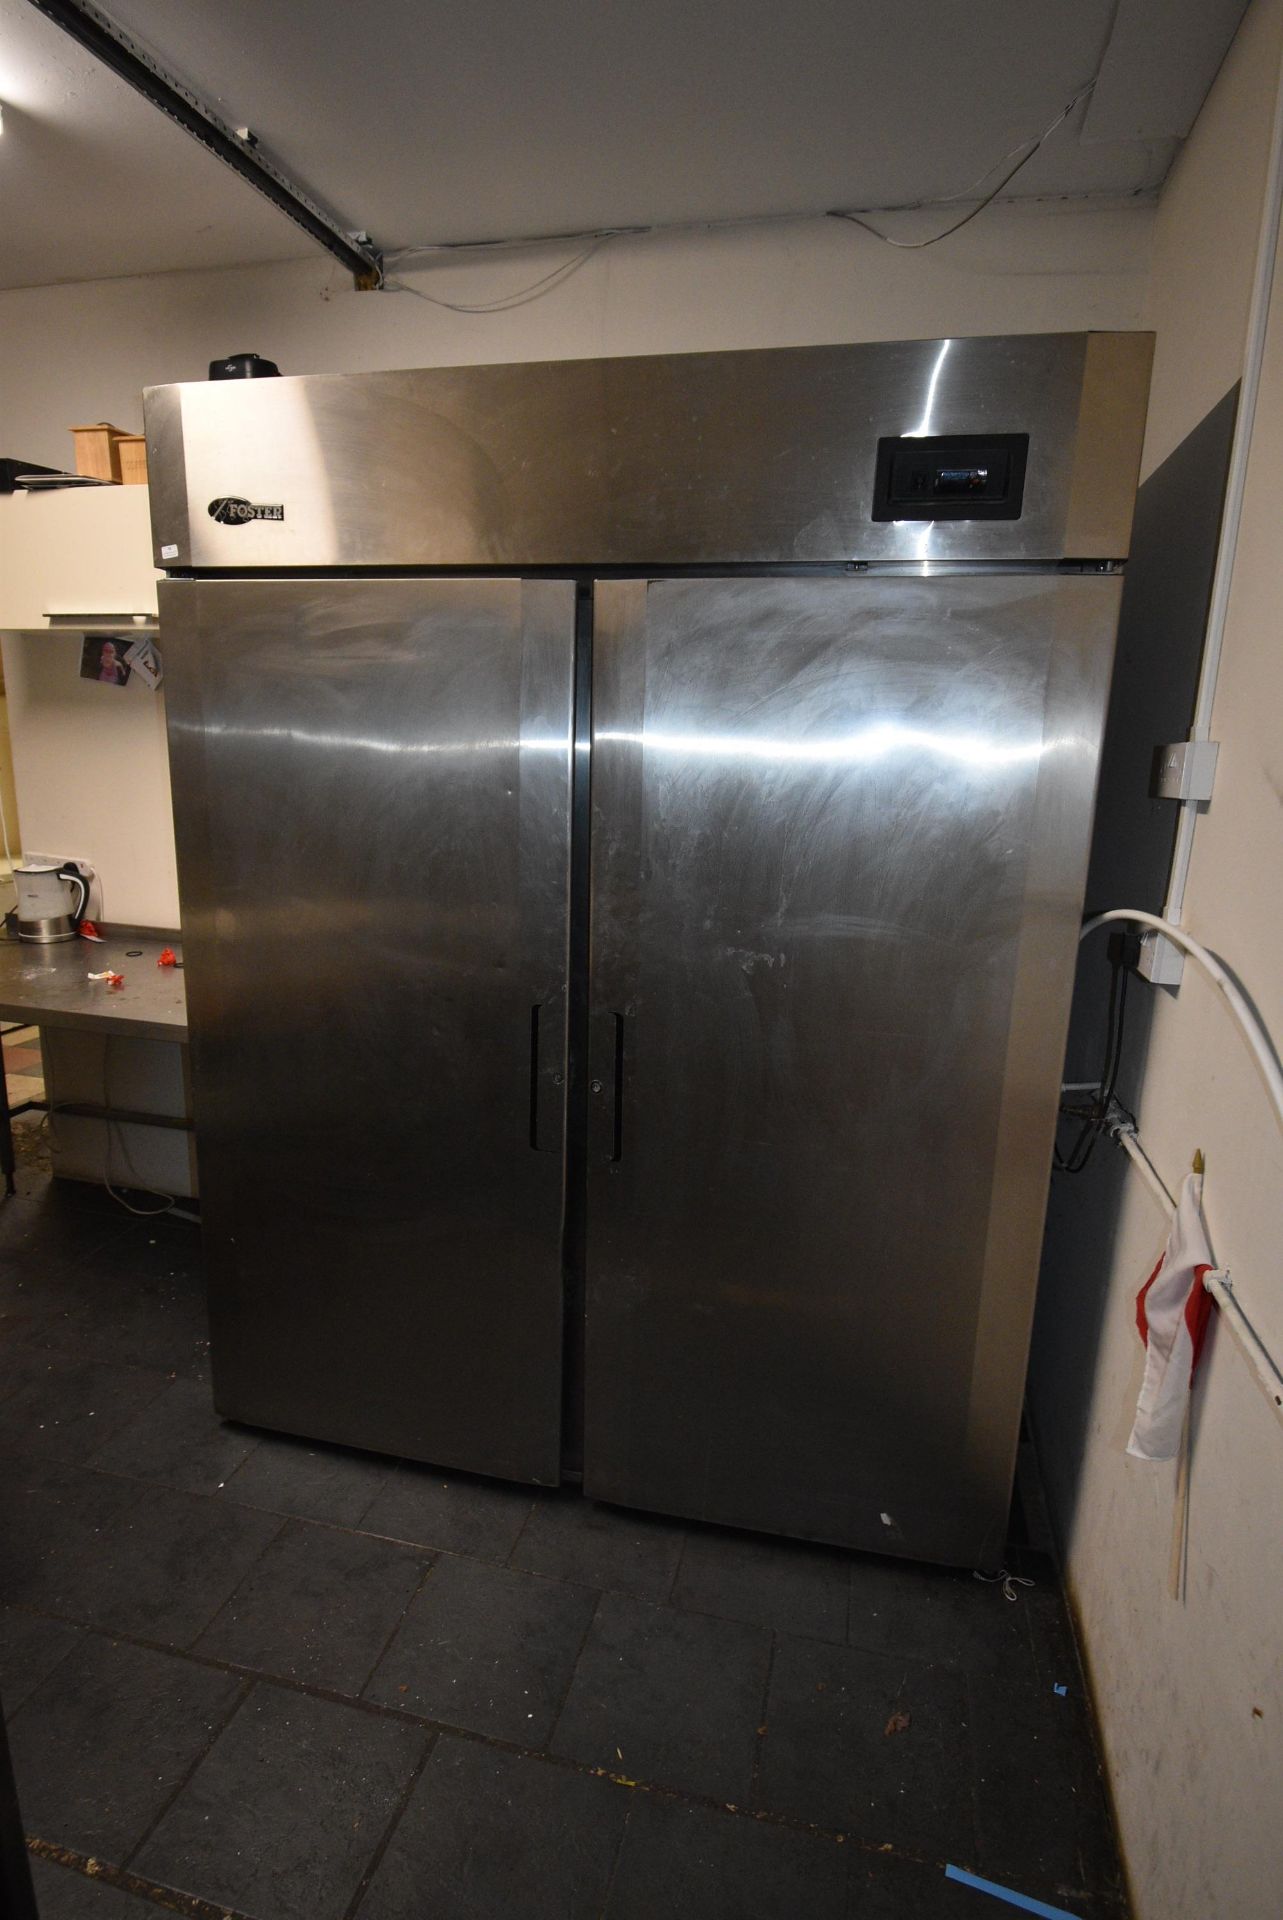 Foster Stainless Steel Two Door Refrigerator Model: GRL2H, Single Phase